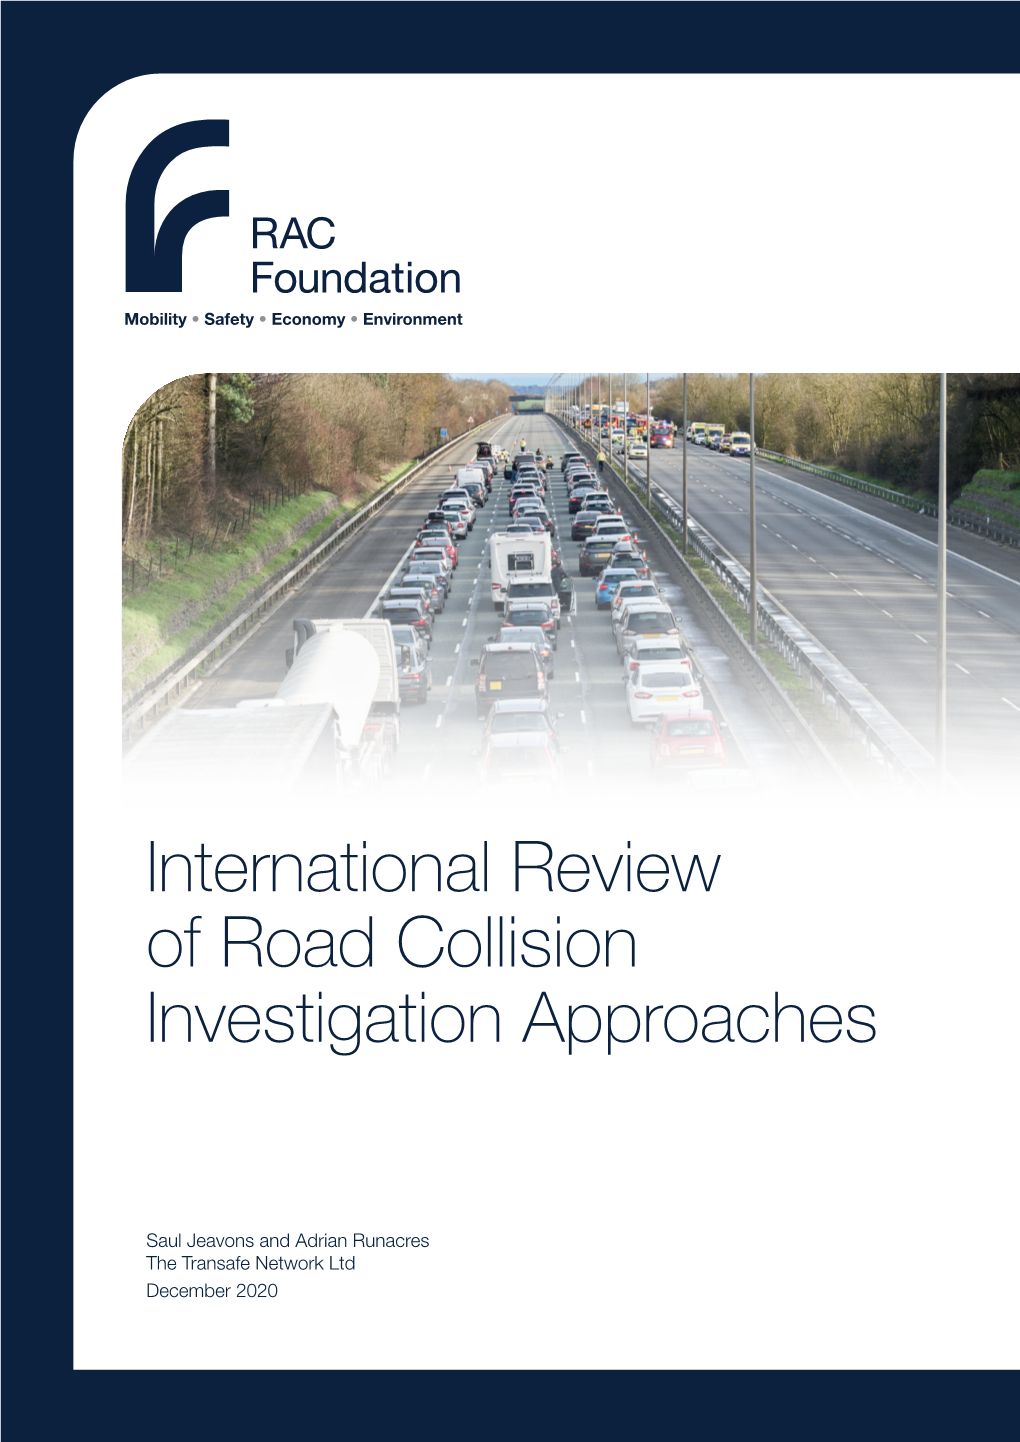 International Review of Road Collision Investigation Approaches